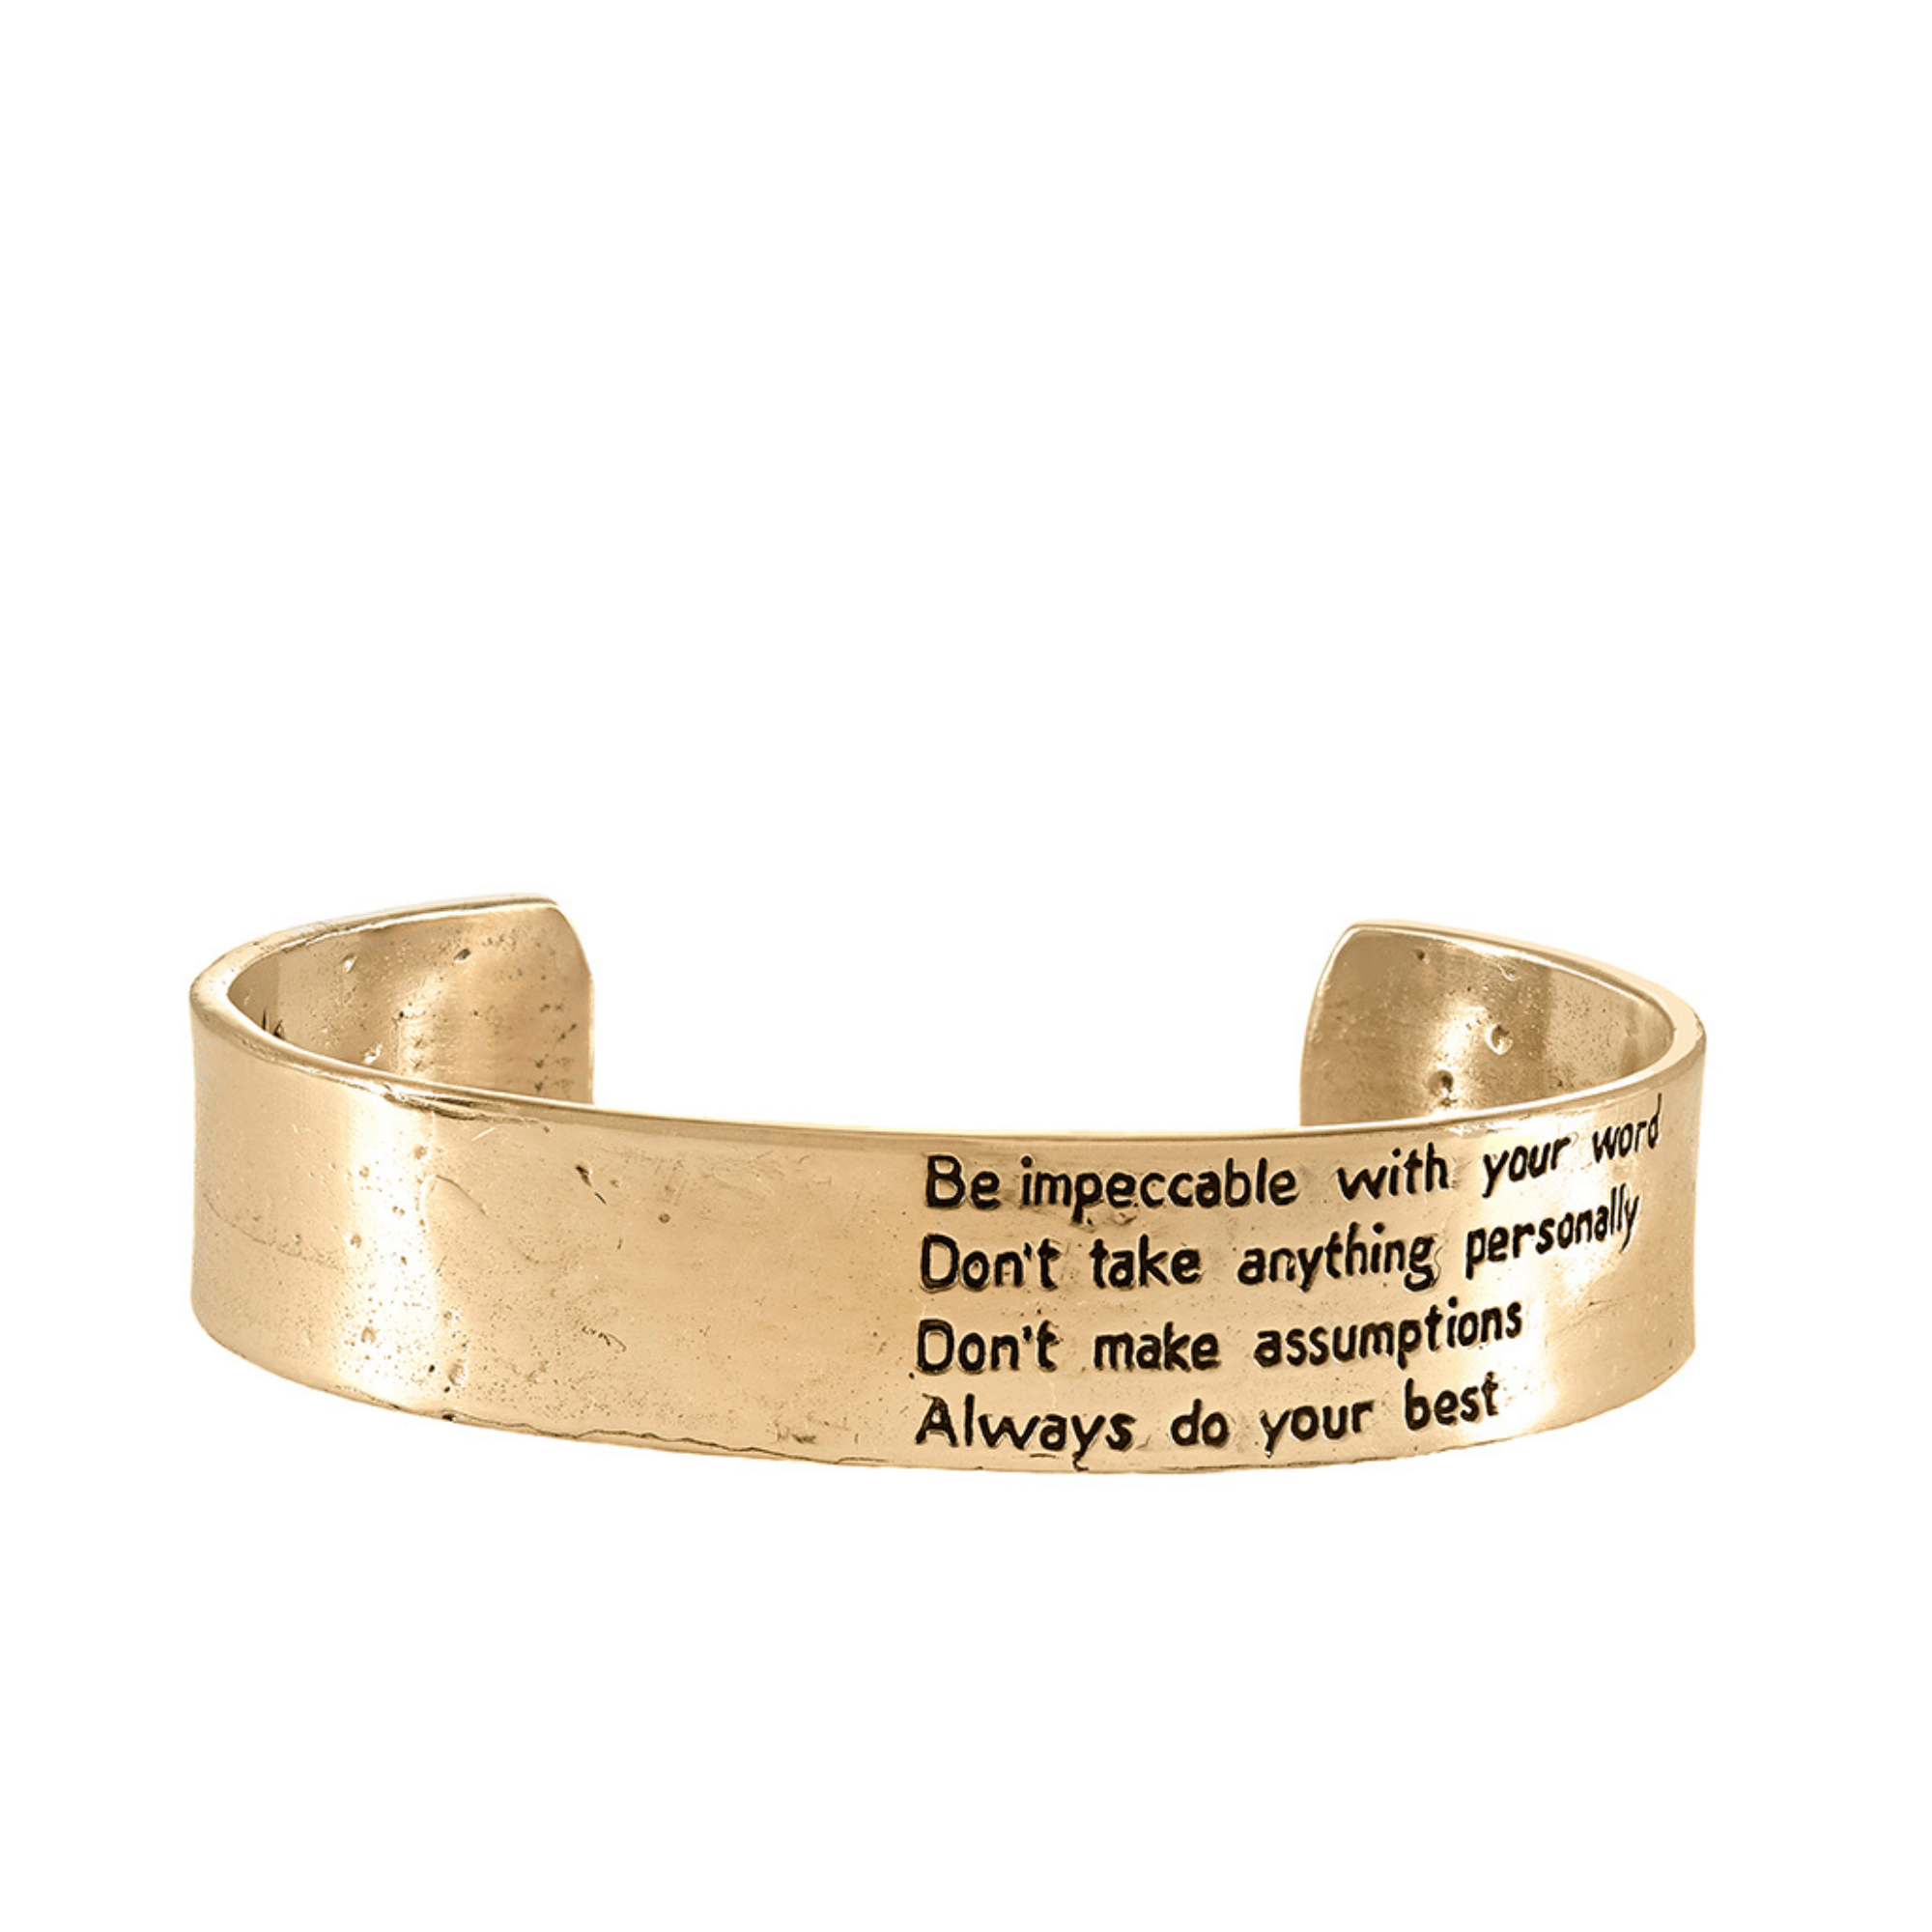 Jewelry Evolution Bracelet Small / Bronze / Antiqued Shiny The Four Agreements Matte Textured Cuff